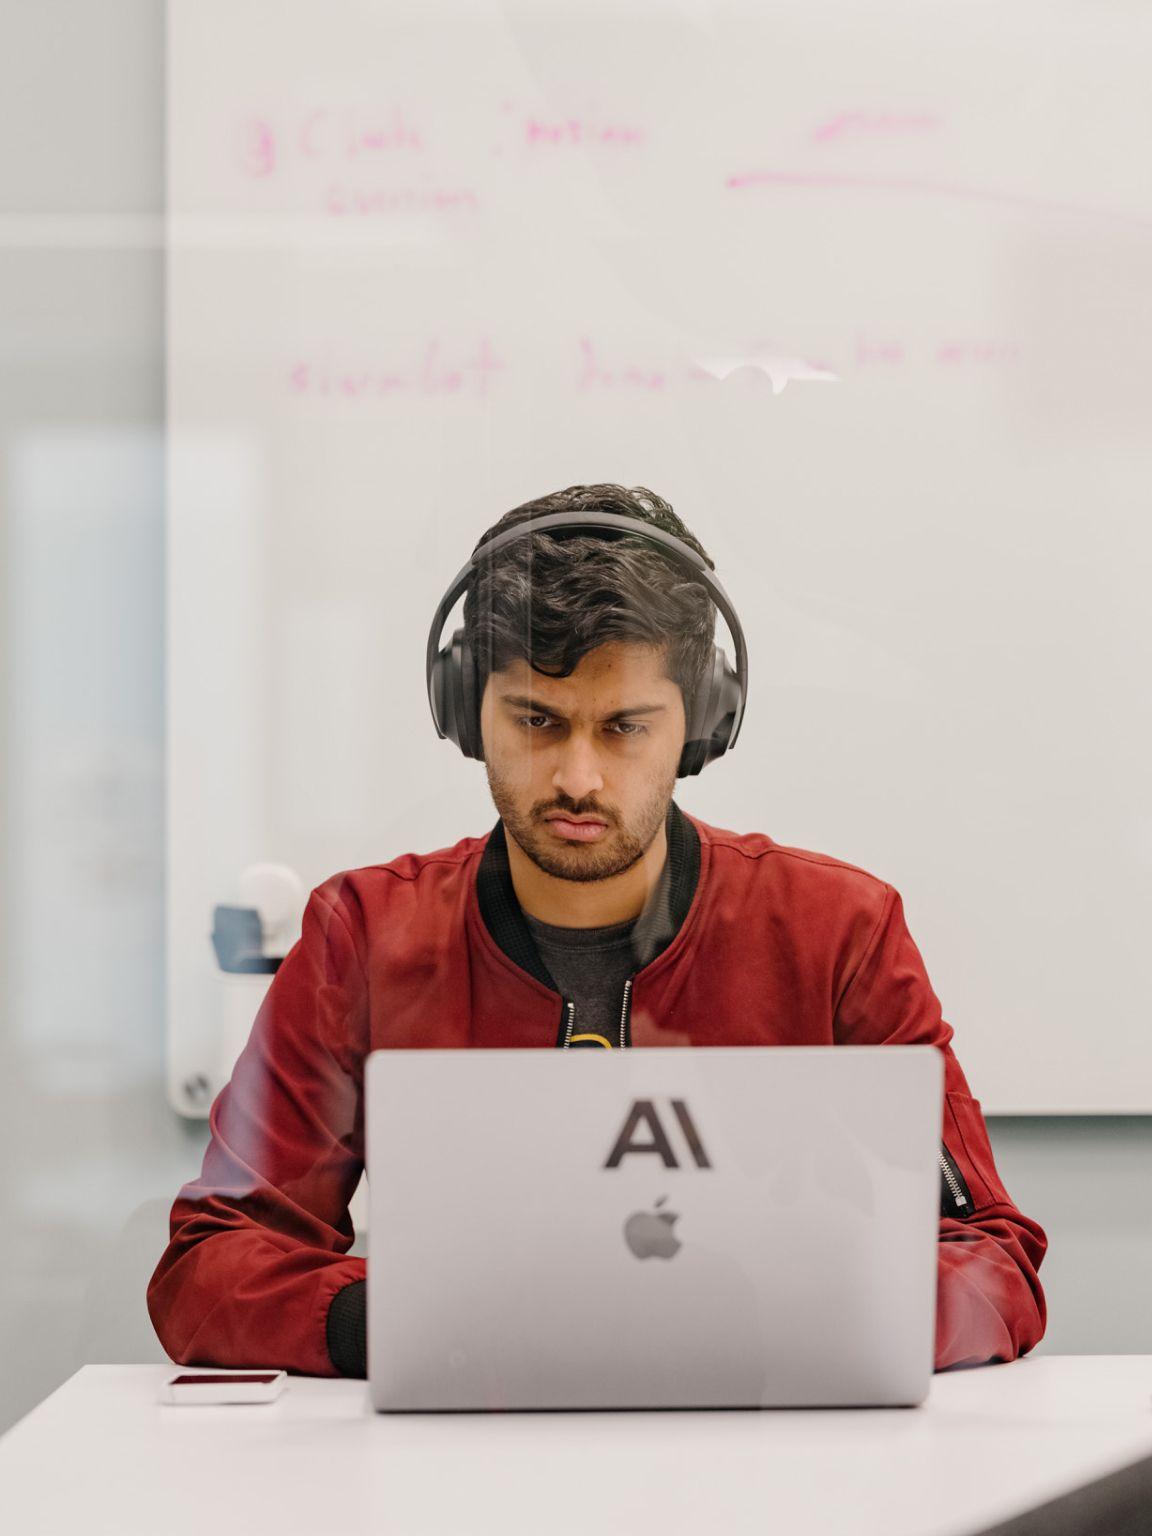 A person working on a laptop and wearing headphones